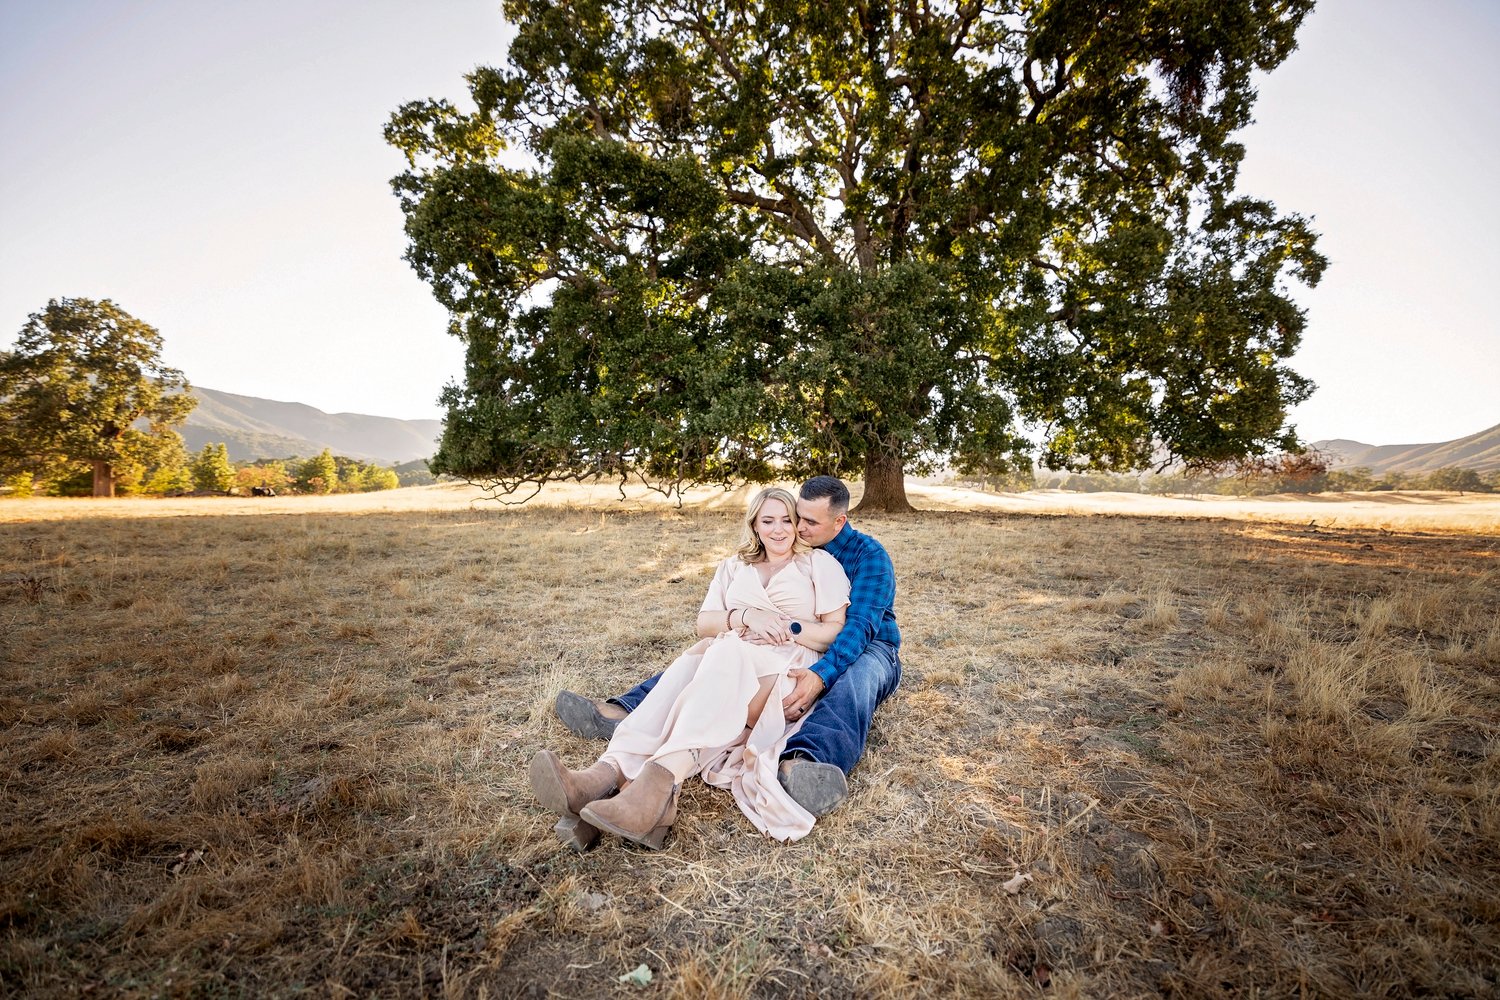 couple sitting on the ground and cuddling in a field in front of an oak tree